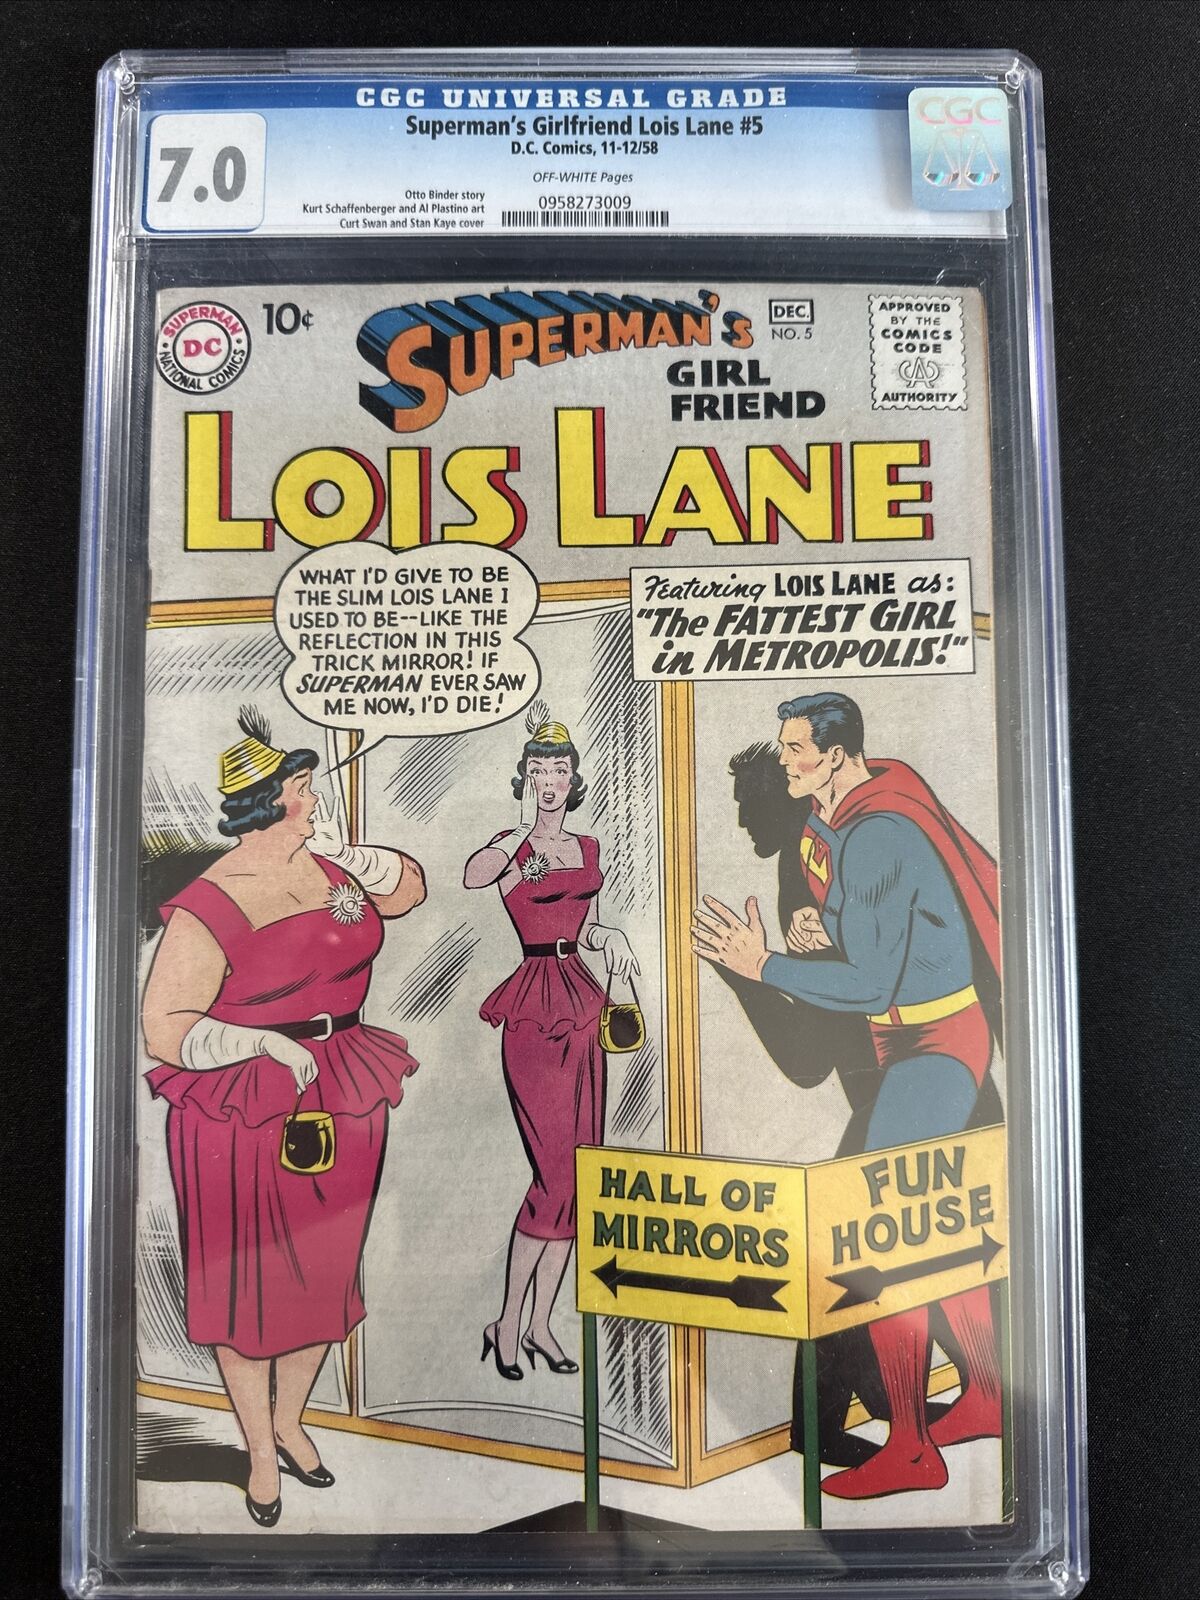 Superman's Girl Friend Lois Lane #5 CGC 7.0 Off White Old Case Silver Age 1958